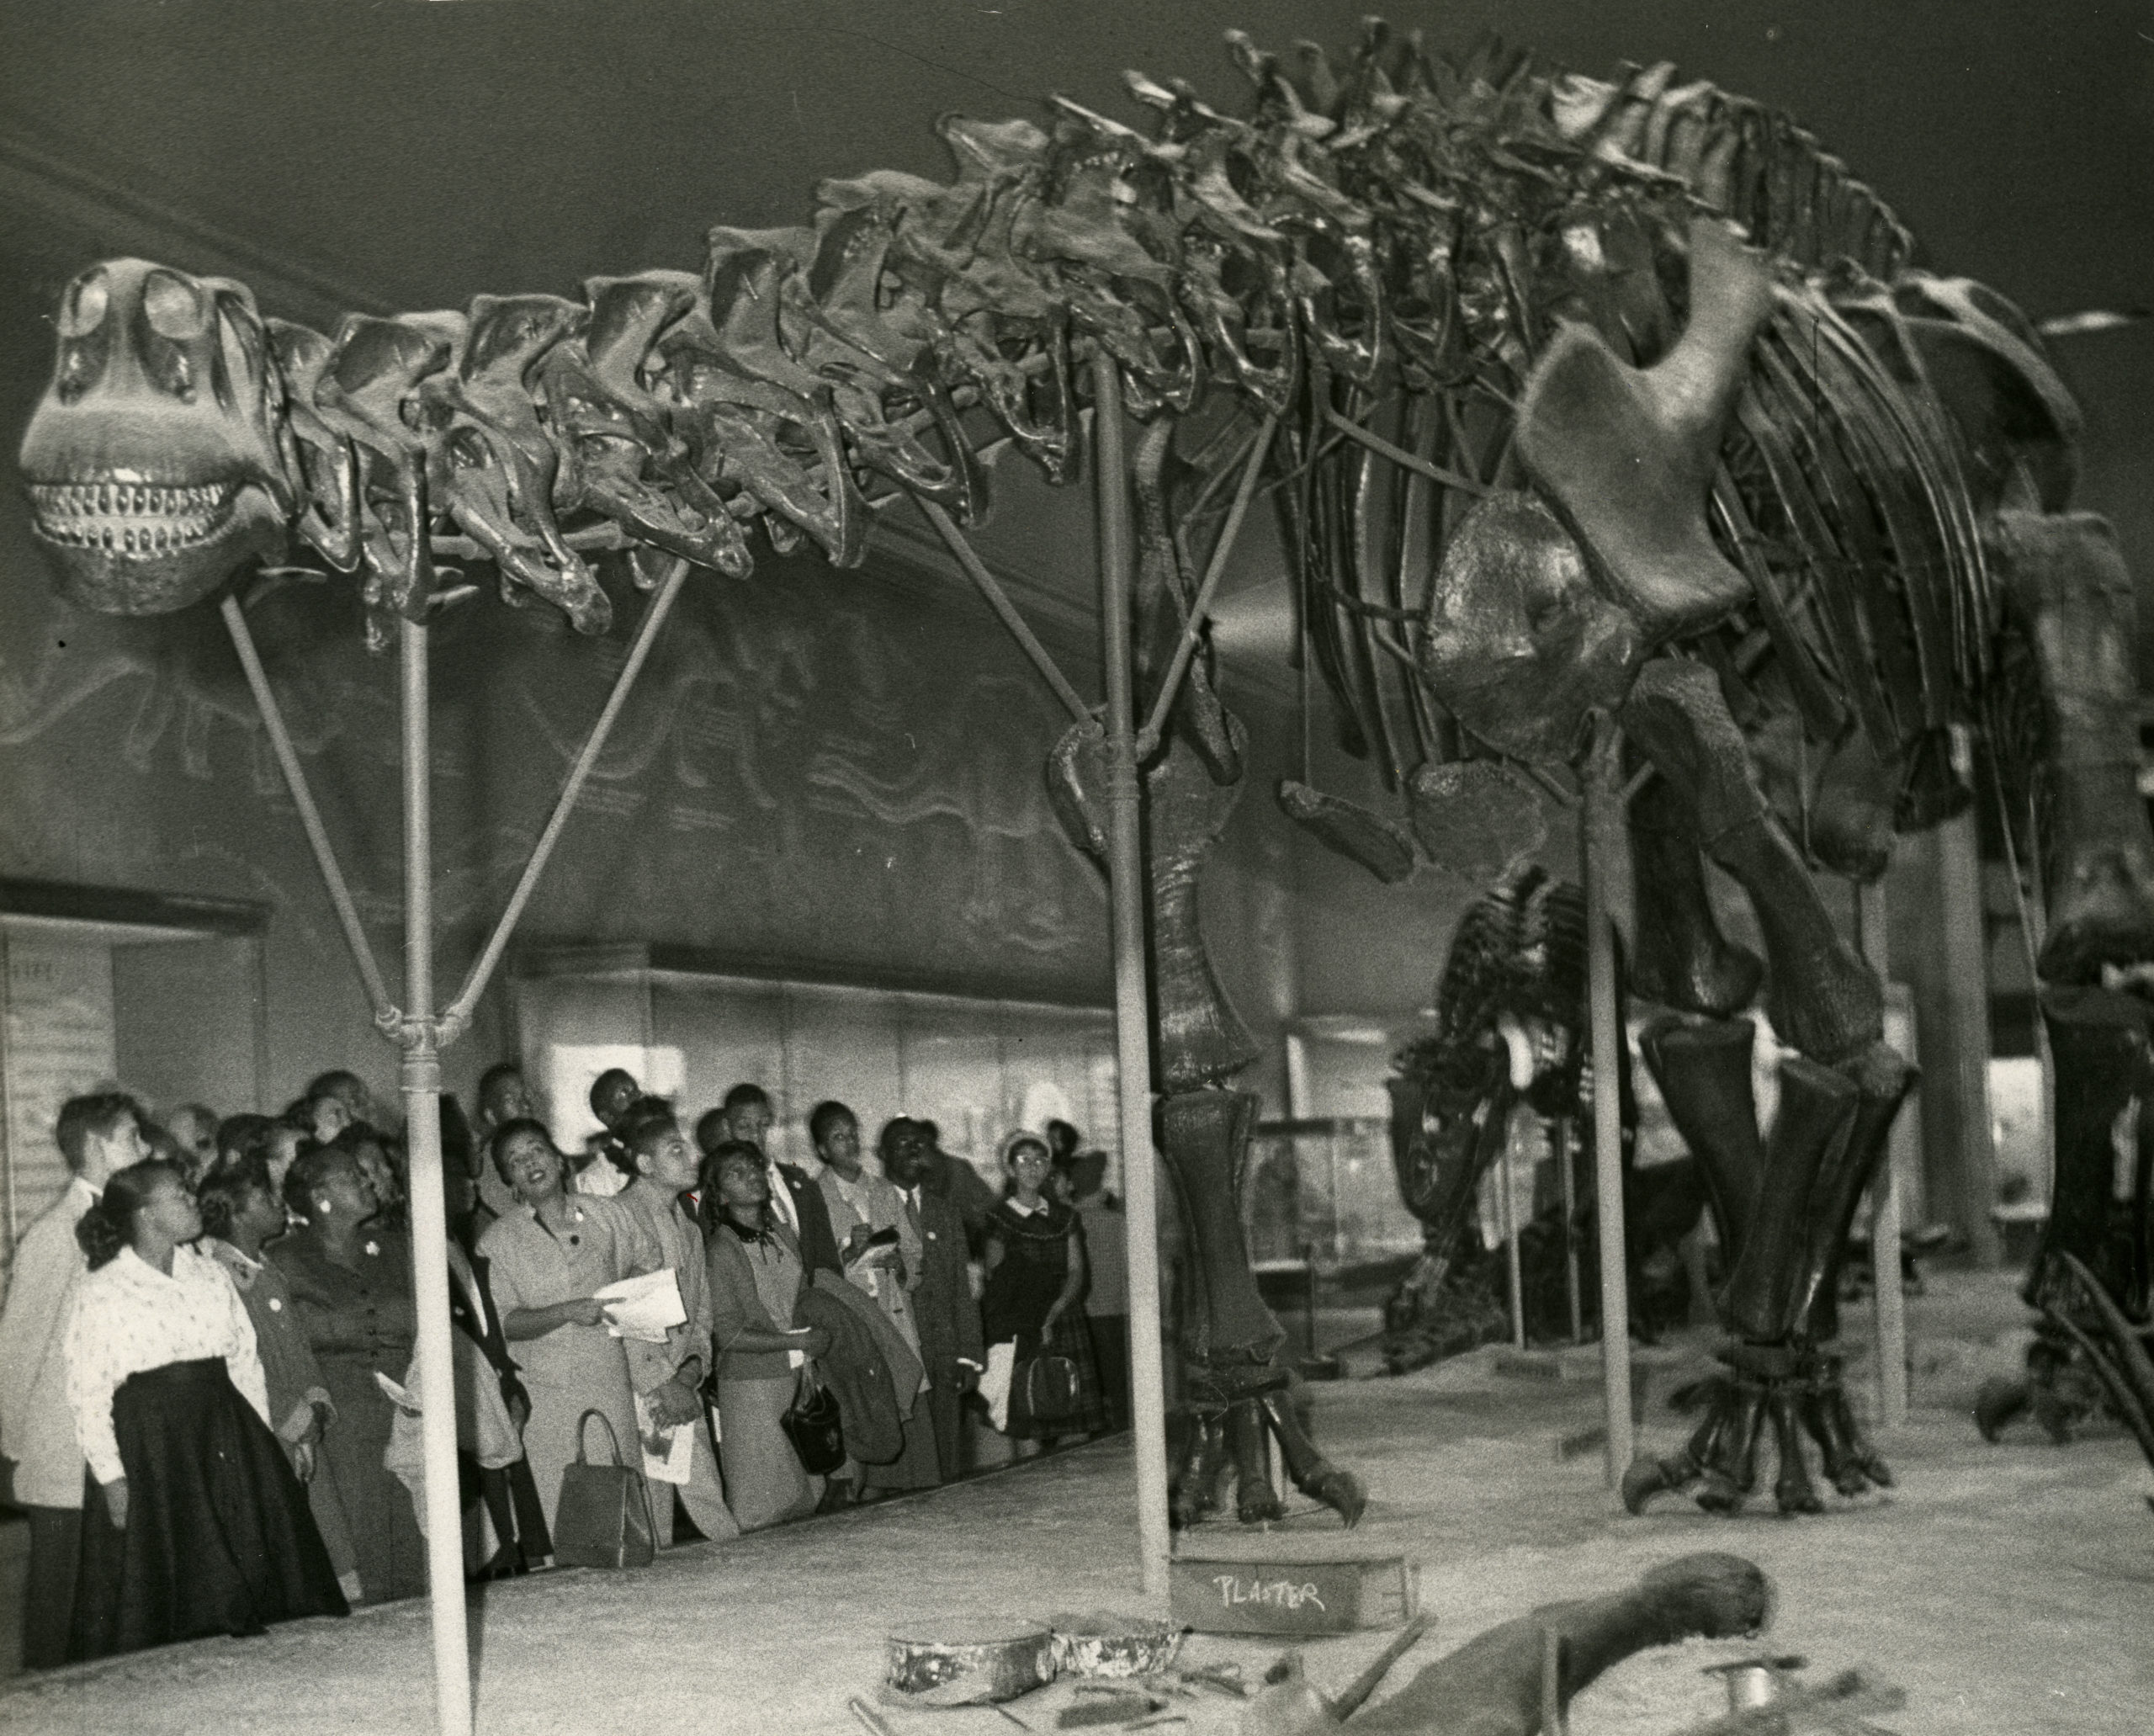 Hoffman-Boston students look at a fossilized dinosaur skeleton on a field trip to a museum, 1950s. Source: Center for Local History, Arlington Public Library.